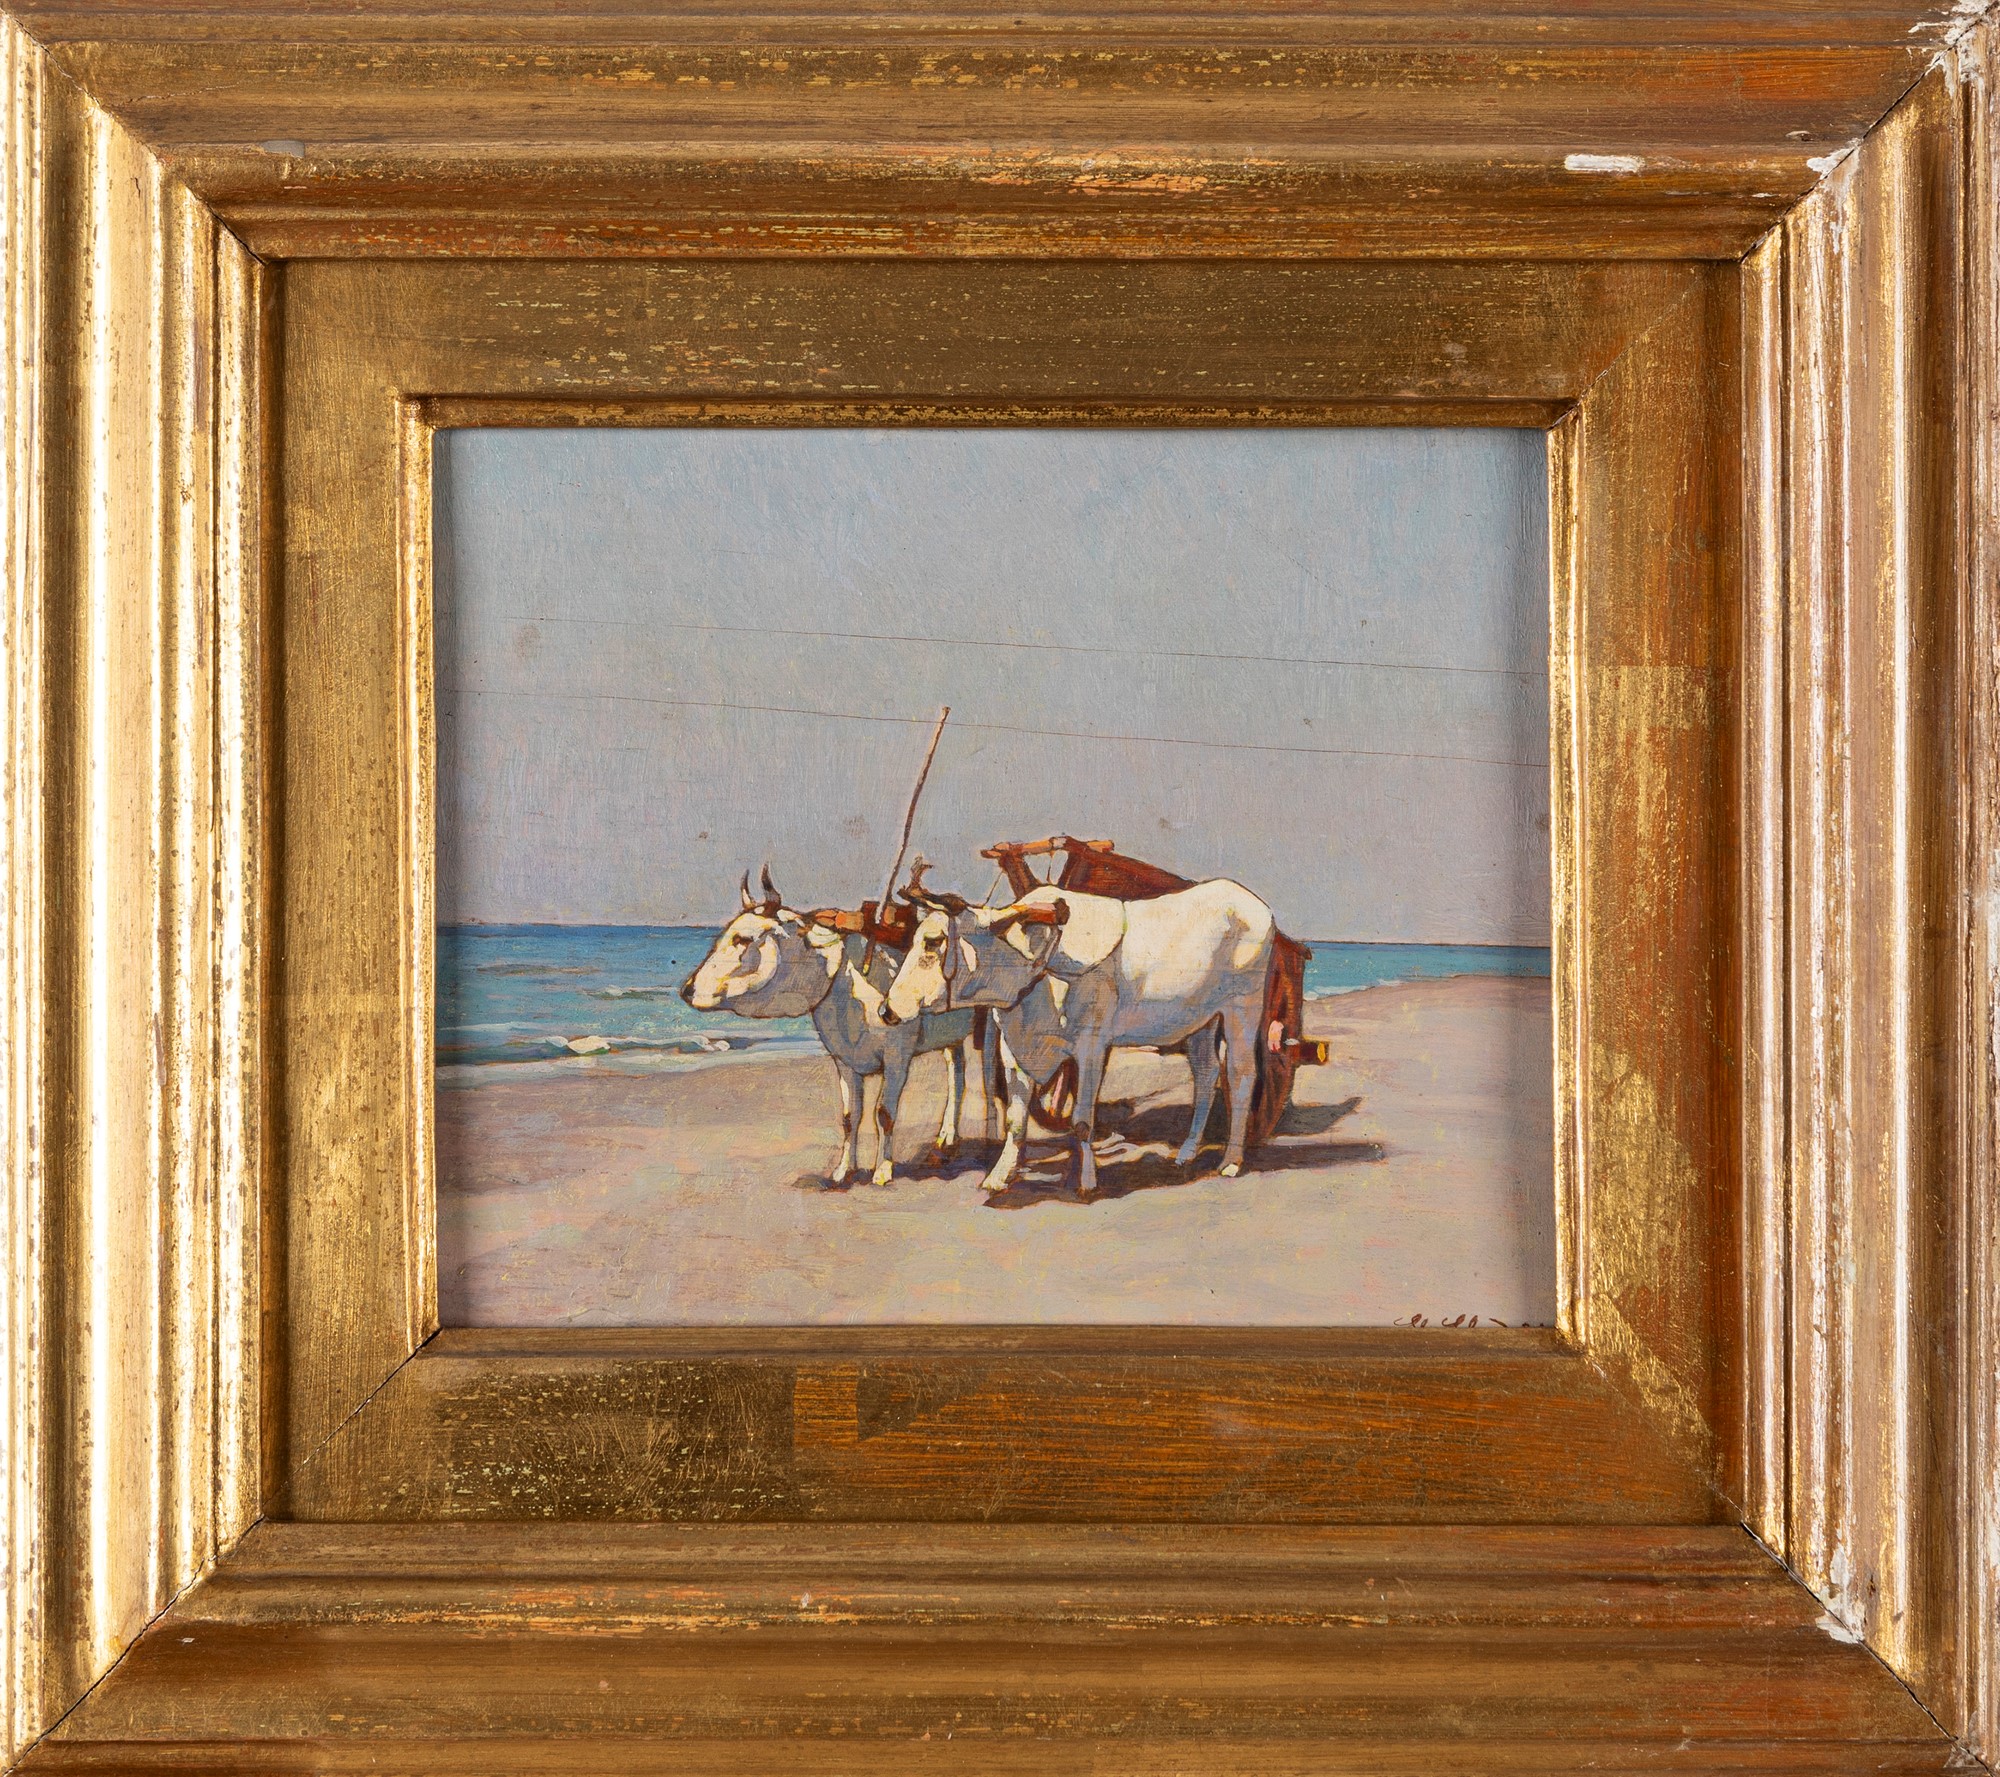 Llewelyn Lloyd (Livorno 1879-Firenze 1949) - Oxen on the beach, 1934 - Image 2 of 3